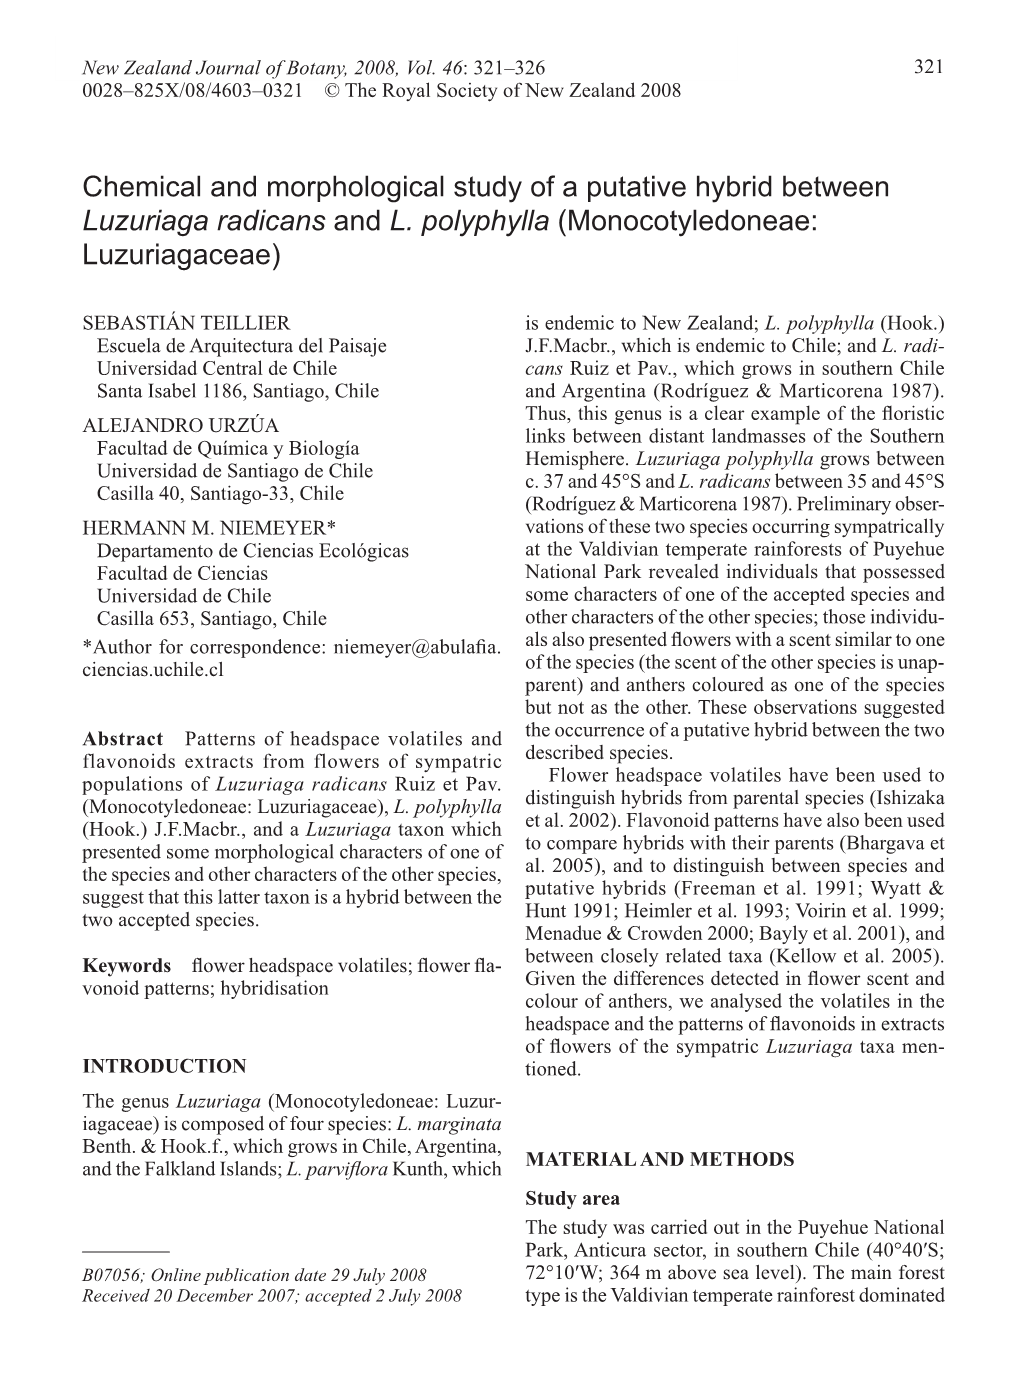 Chemical and Morphological Study of a Putative Hybrid Between Luzuriaga Radicans and L. Polyphylla (Monocotyledoneae: Luzuriagaceae)